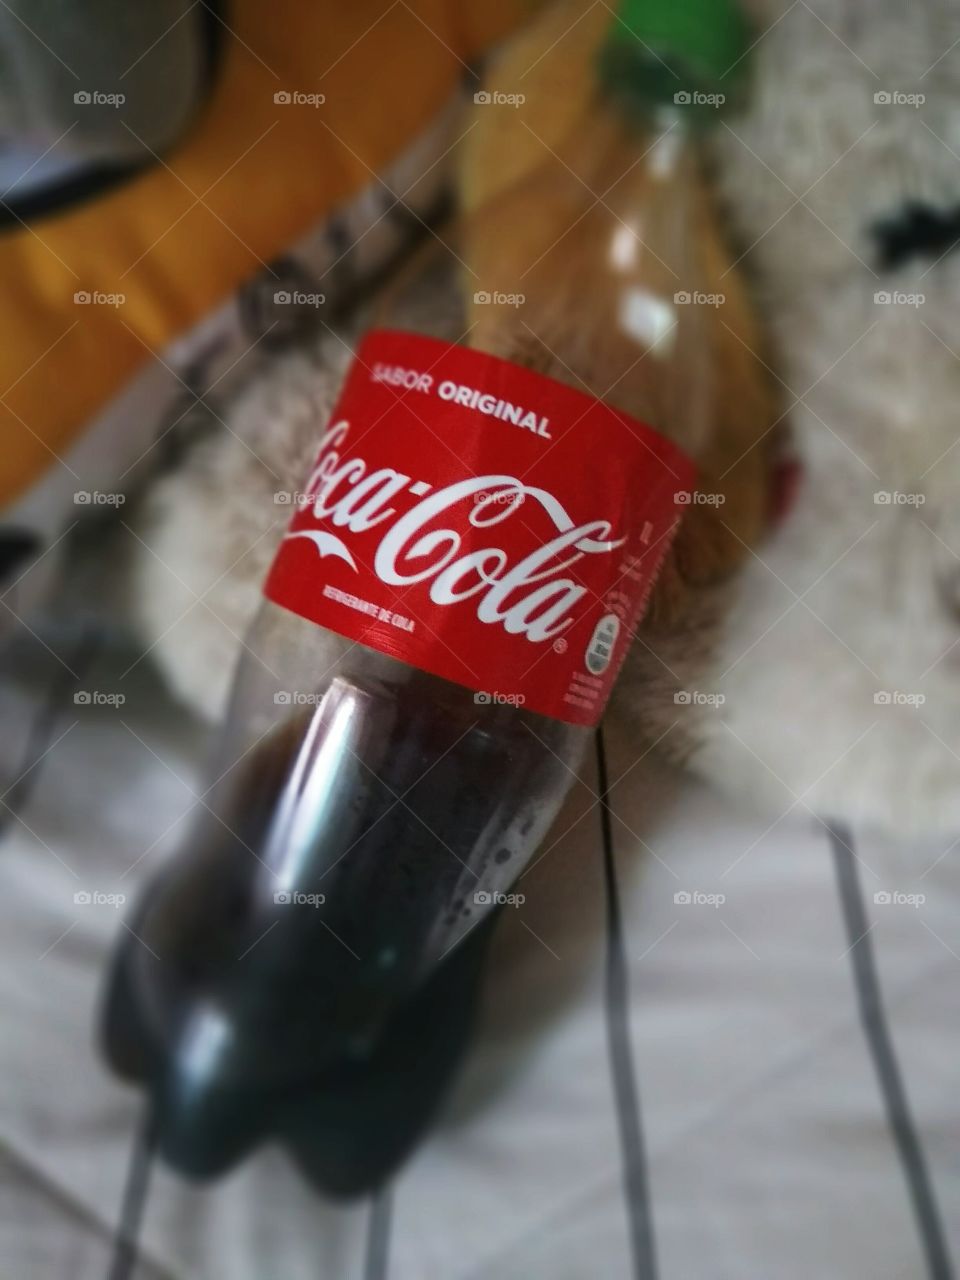 Open up happiness too, let's feel something new! Coke